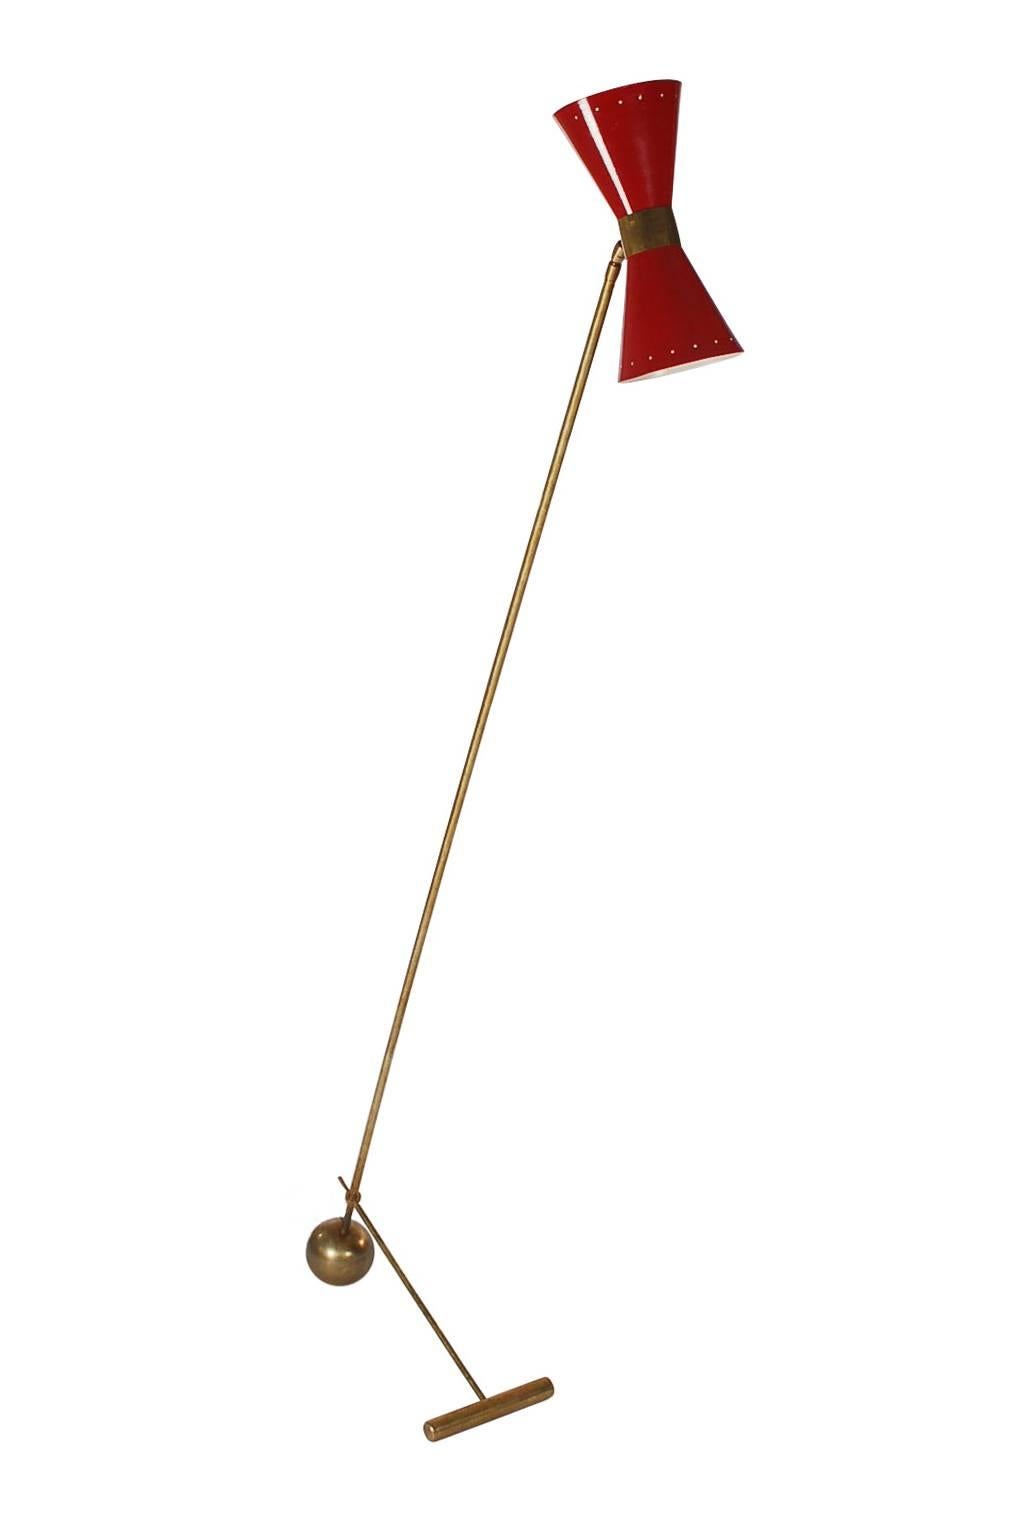 A fine Italian floor lamp from the 1950s. It features solid brass base and stand with a red enameled shade. Probably Stillovo, Arredoluce, or Arteluce. The brass has a beautiful warm patina. Takes two standard bulbs. Tested and fully working.